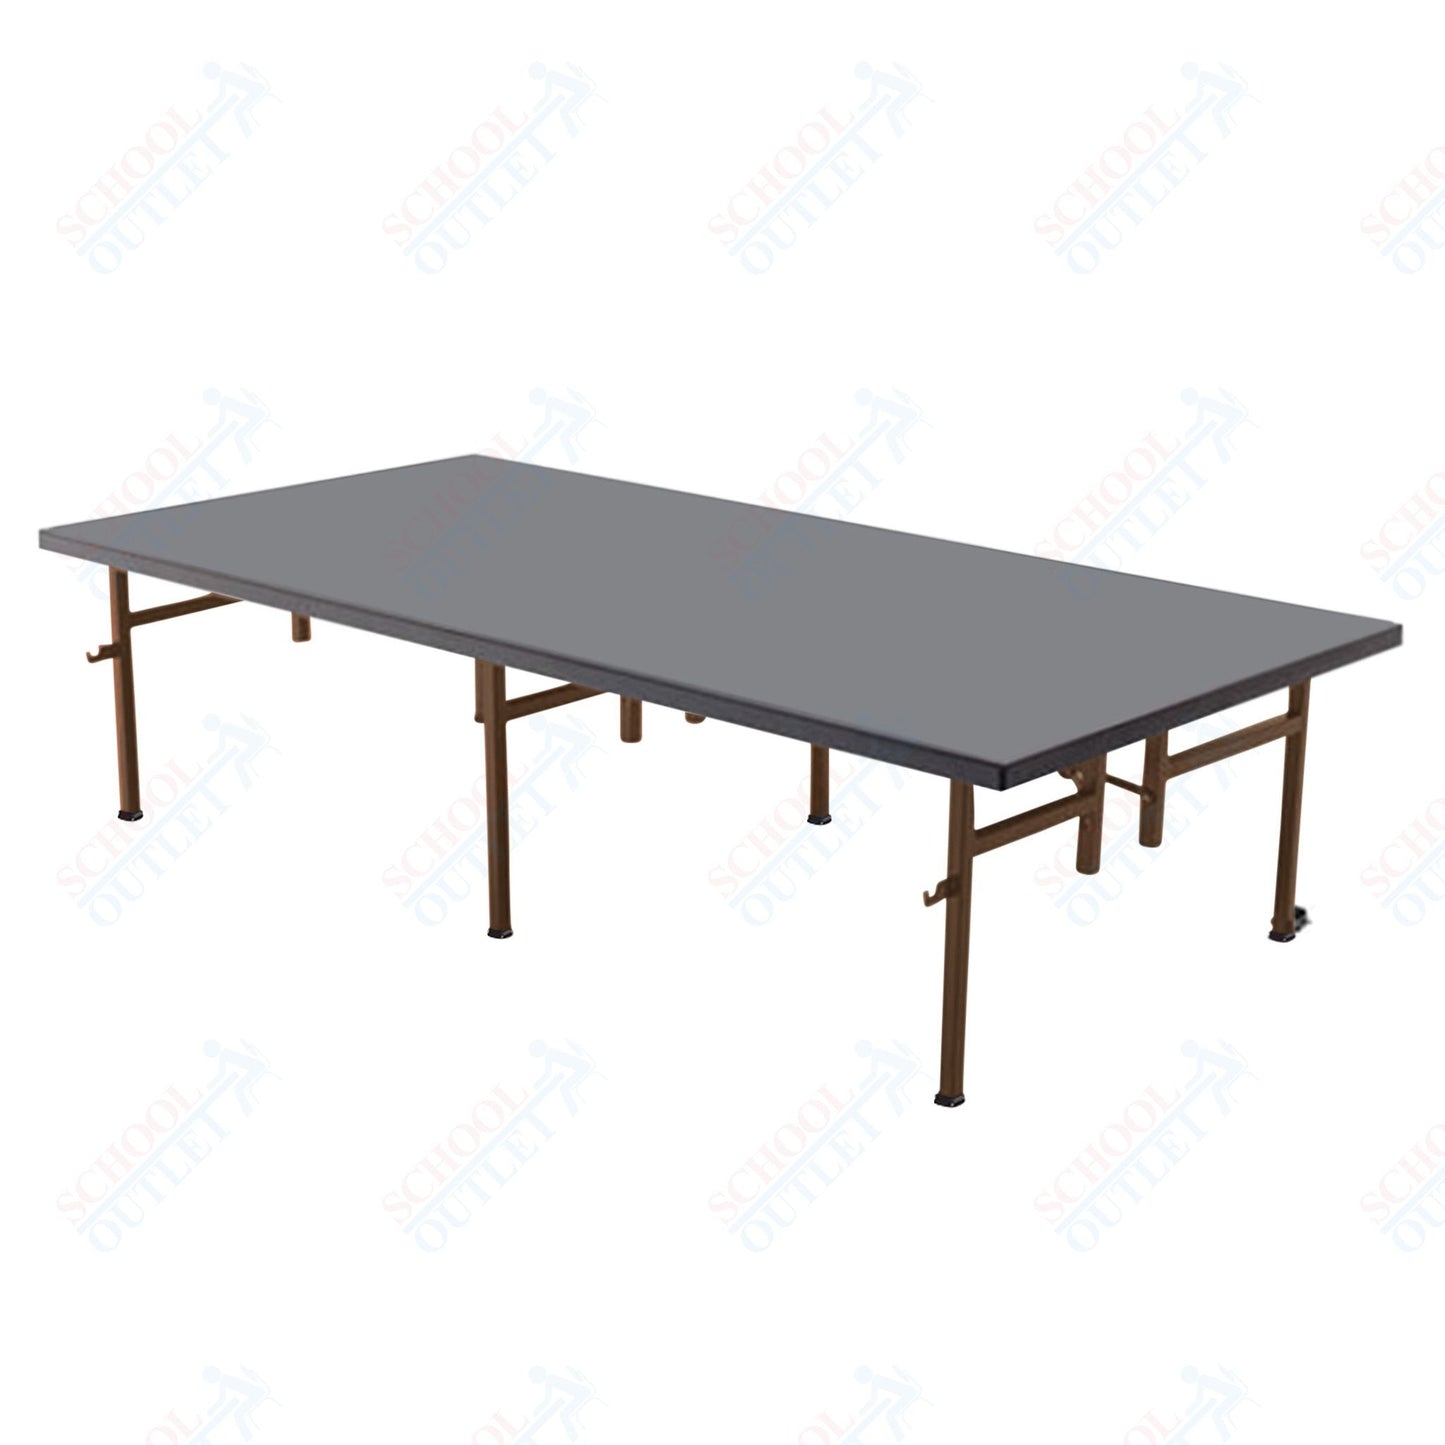 AmTab Fixed Height Stage - Polypropylene Top - 48"W x 48"L x 16"H (AmTab AMT - ST4416P) - SchoolOutlet